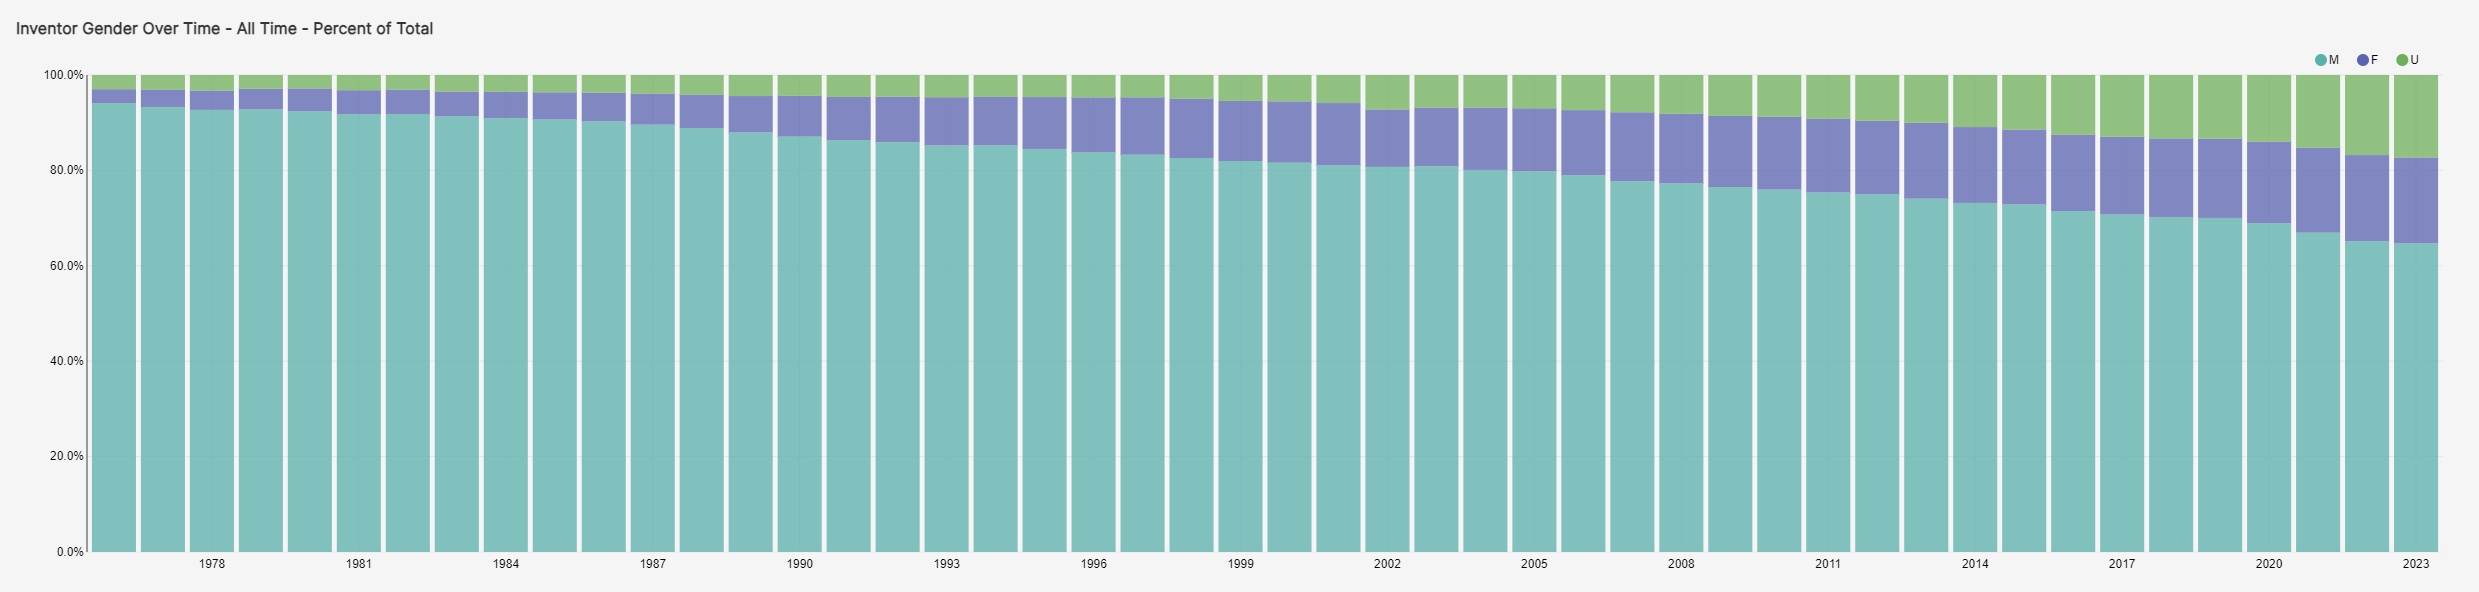 A bar graph showing that the percentage of inventors identified as women is growing over time.